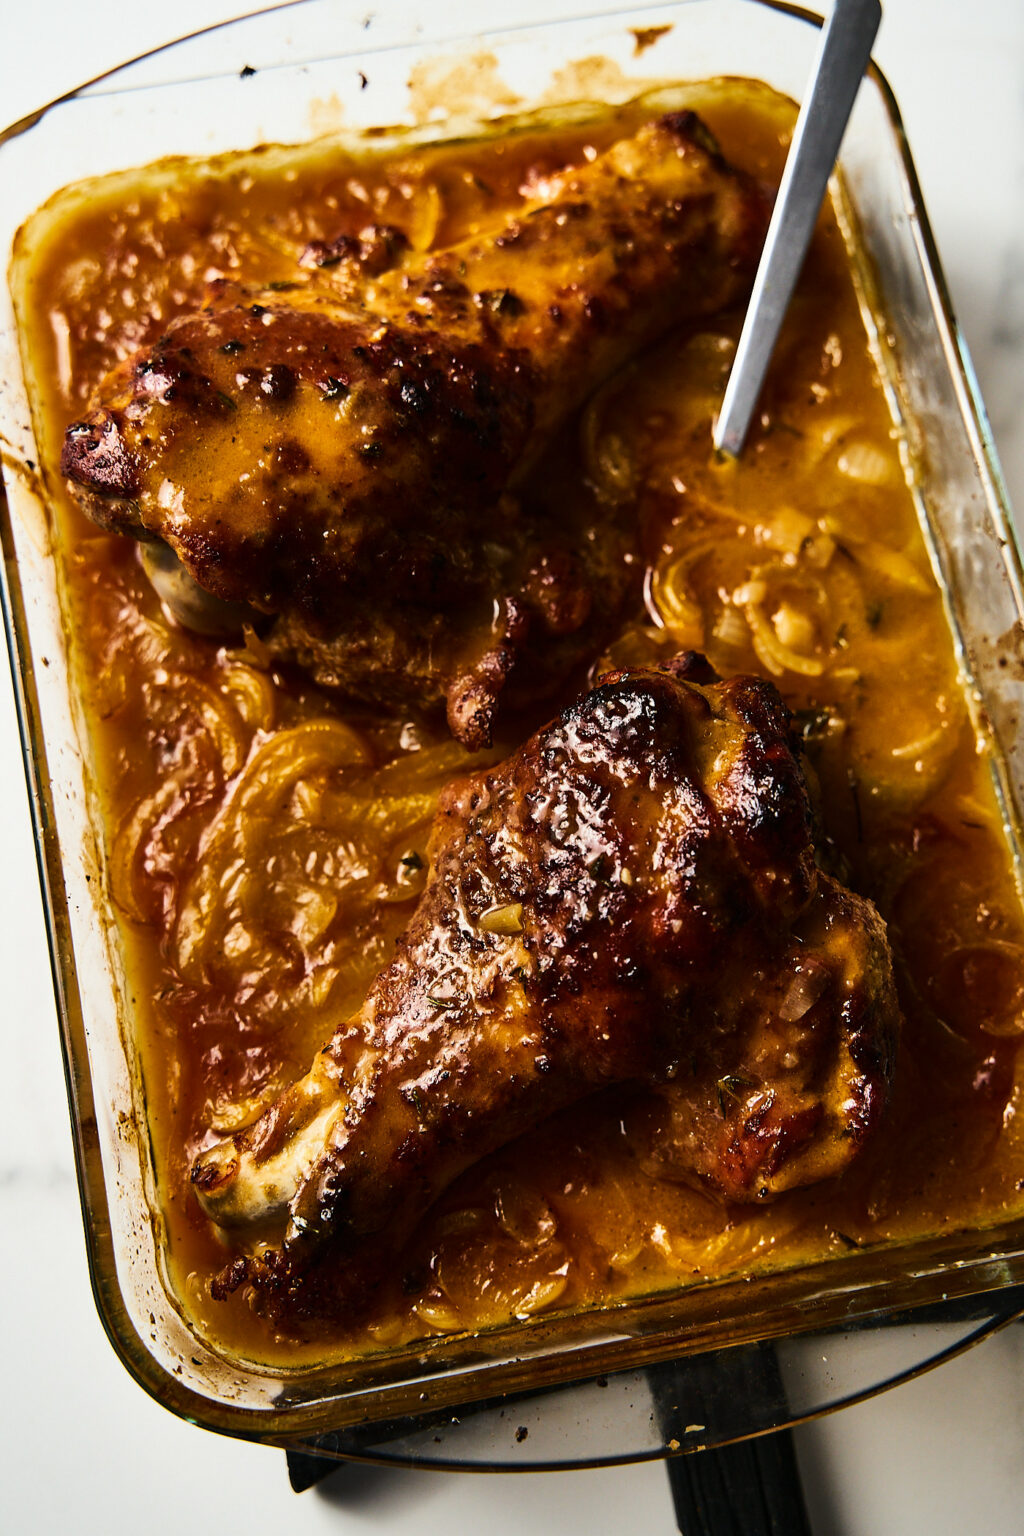 Braised and baked turkey wings in gravy in a baking mold